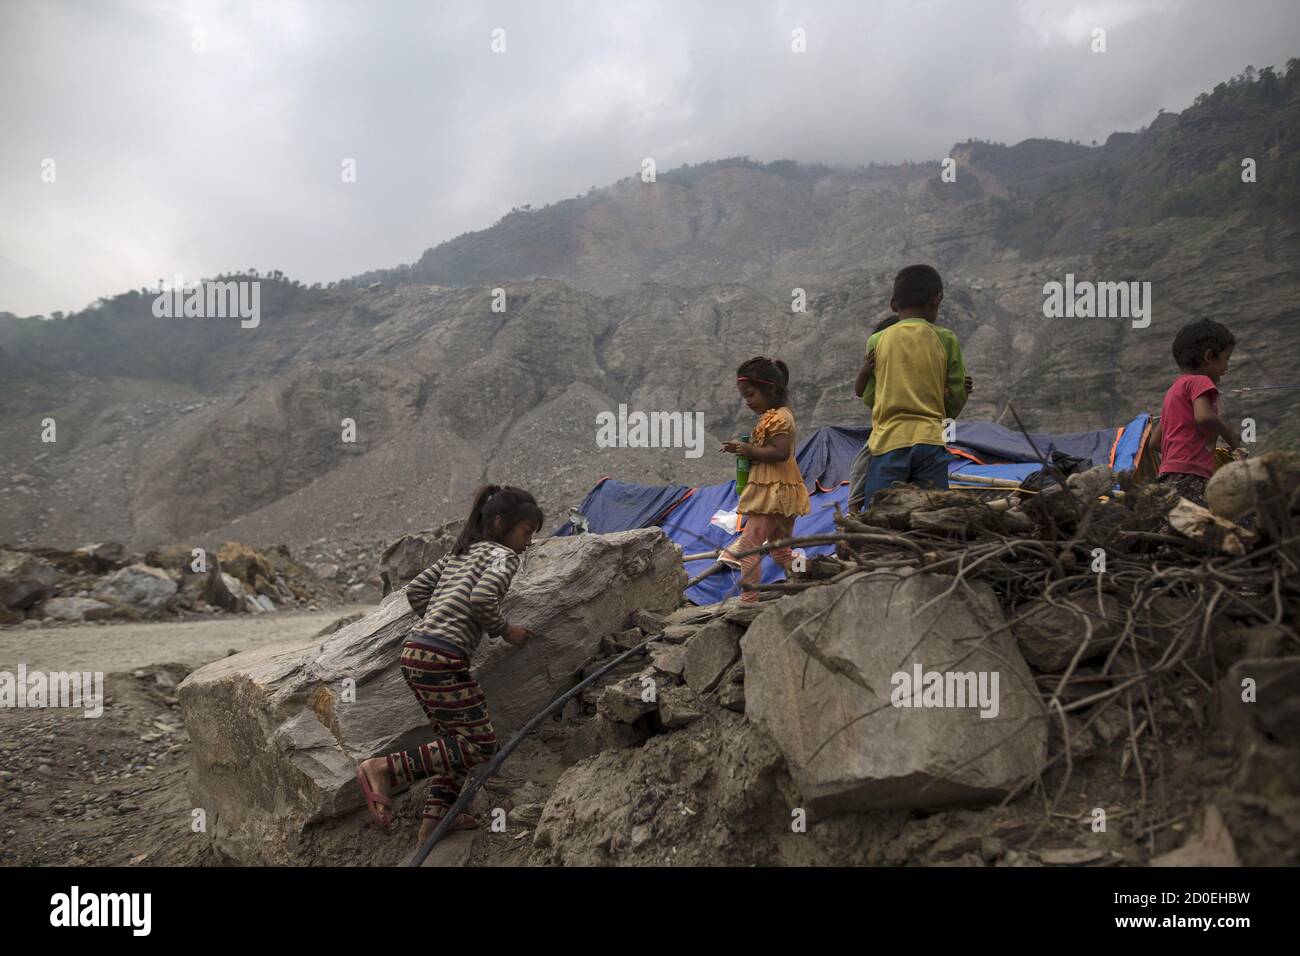 Nepalese children run next to their makeshift shelter near a landslide area after the April 25 earthquake at Jure village in Sindhupalchowk, Nepal, May 9, 2015. Areas of Nepal remain perilously unstable following last month's devastating earthquake, and, as a May 12, 2015 tremor showed, landslides pose an ongoing menace that will only increase when seasonal monsoon rains begin to fall in the coming weeks. Picture taken May 9, 2015. To match QUAKE-NEPAL/MONSOON REUTERS/Athit Perawongmetha Stock Photo